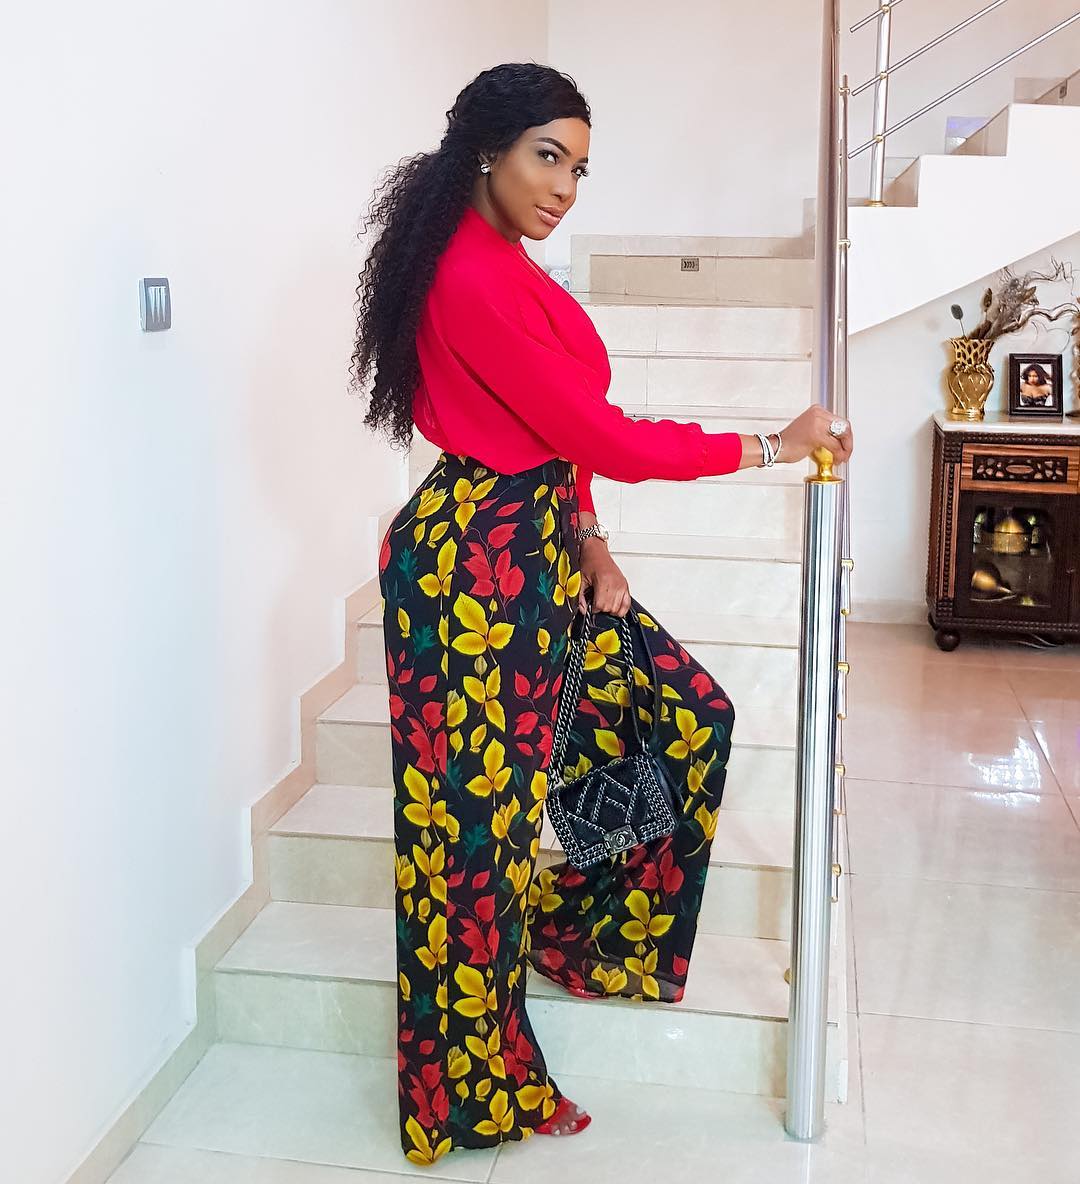 'I never liked my body growing up and was constantly bullied about it' - Chika Ike reveals.